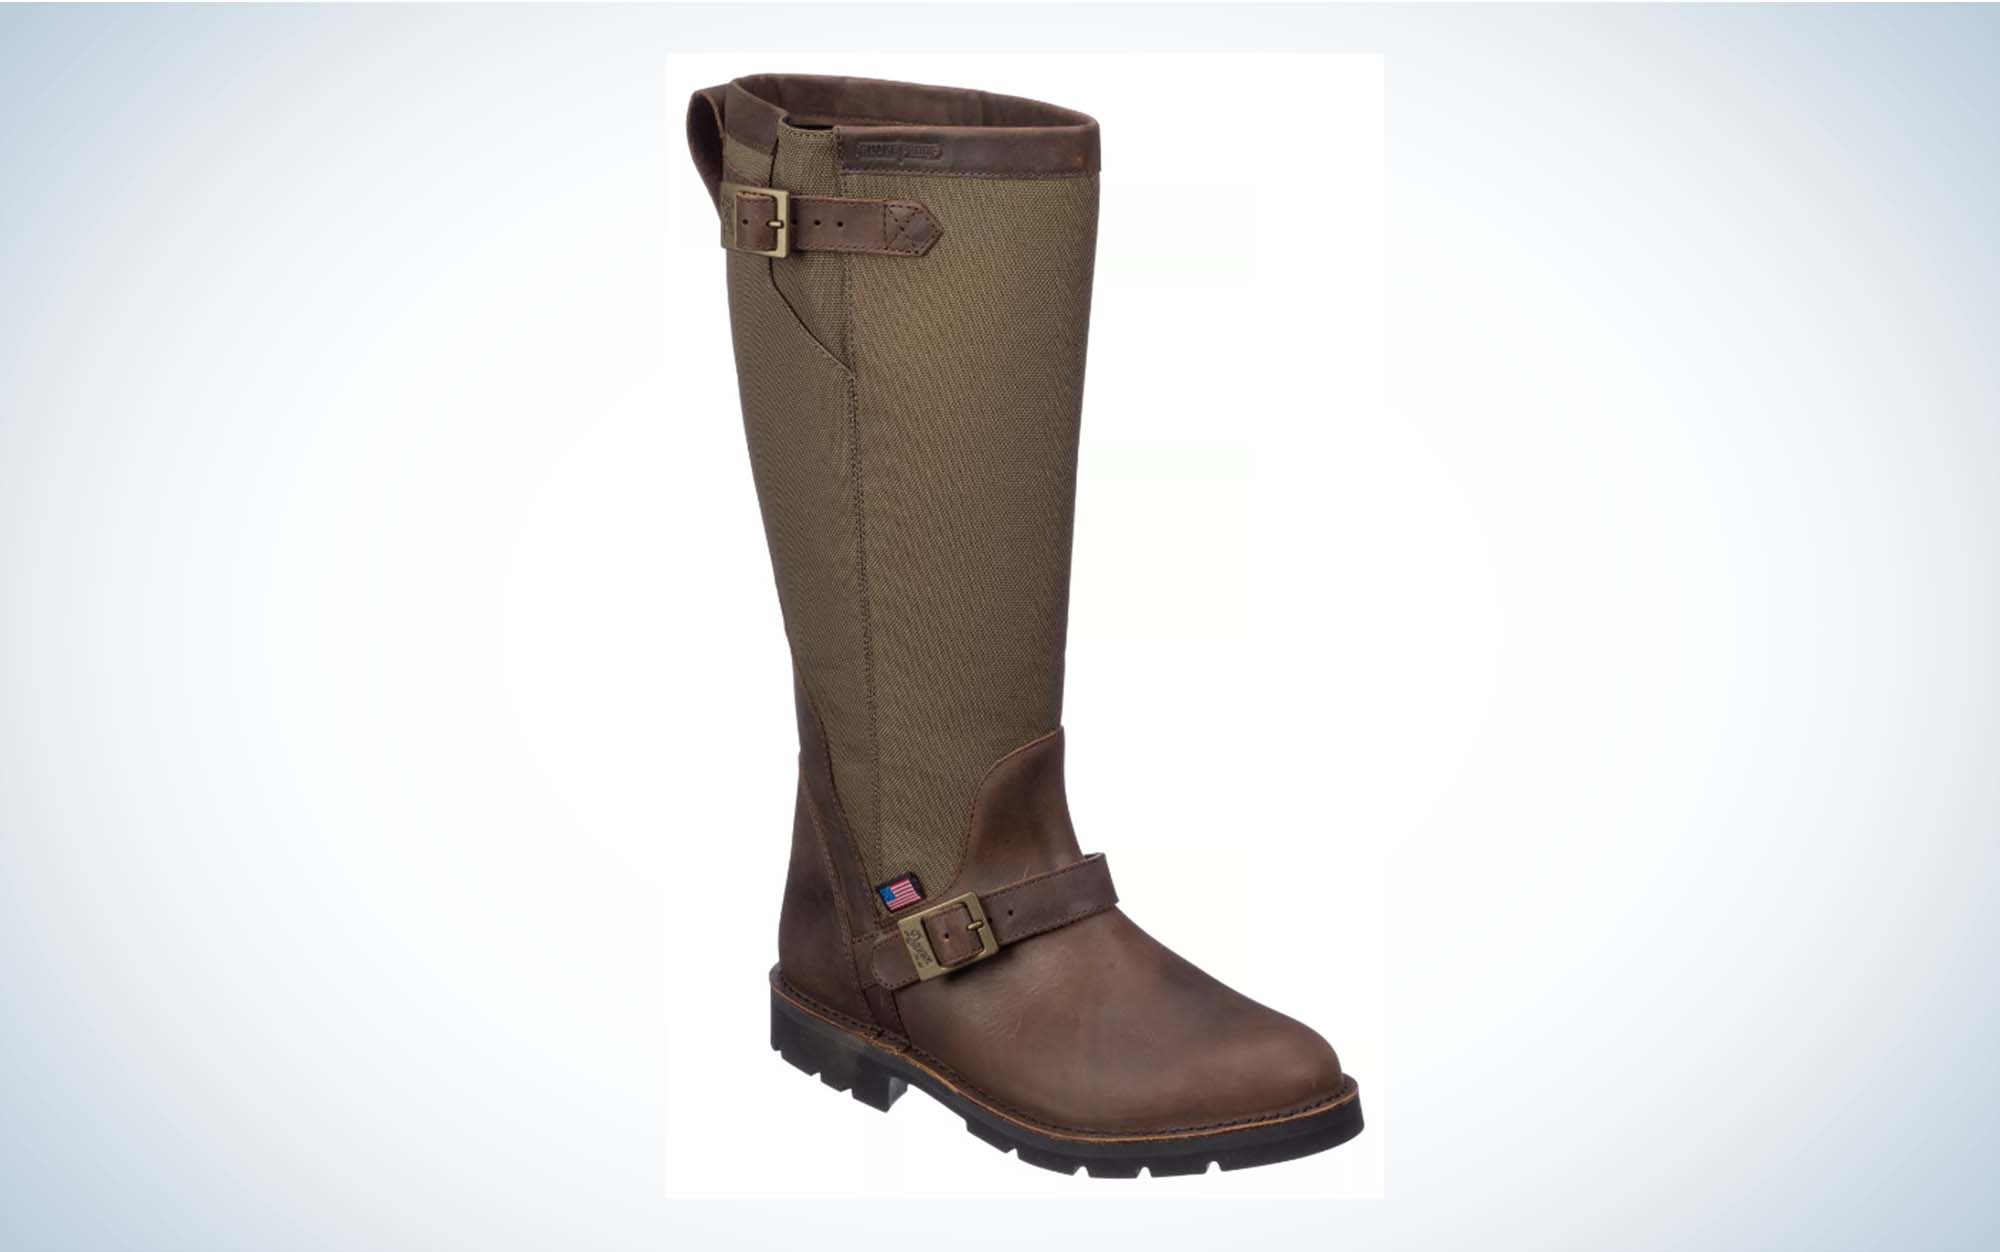 The Danner San Angelo is the best leather snake boot.